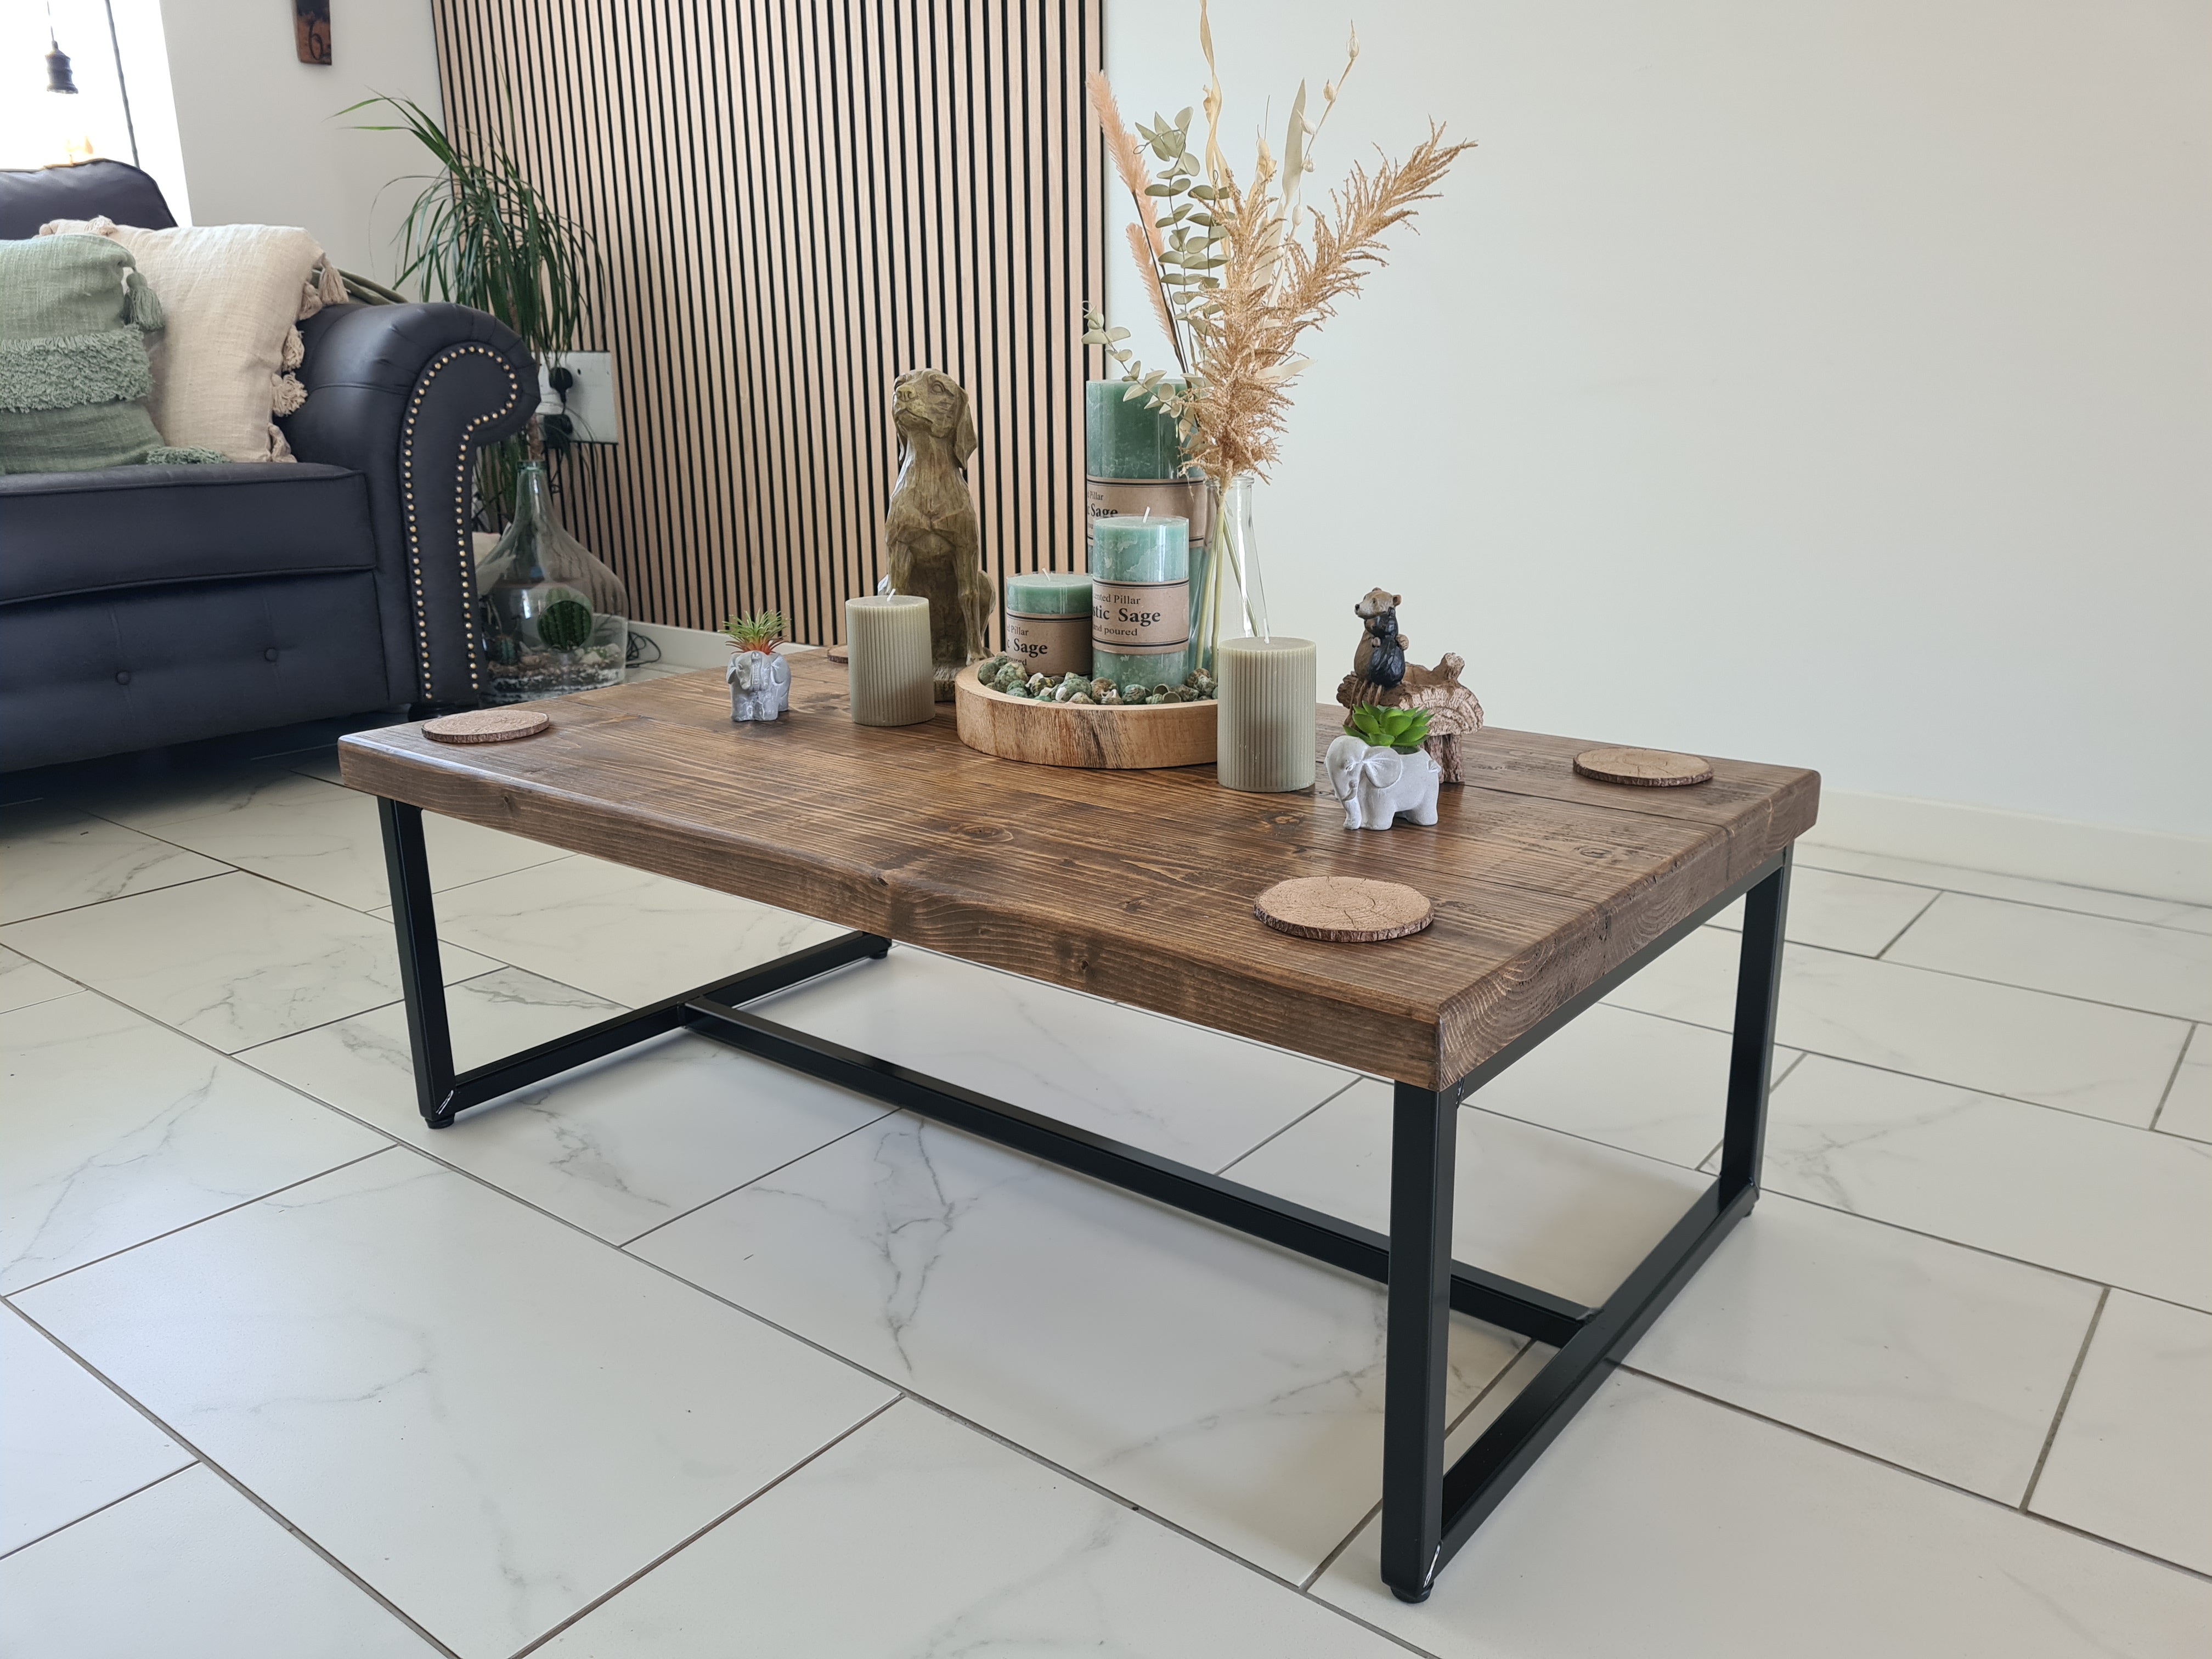 Coffee table/end table/rustic/industrial – DK Fabrications